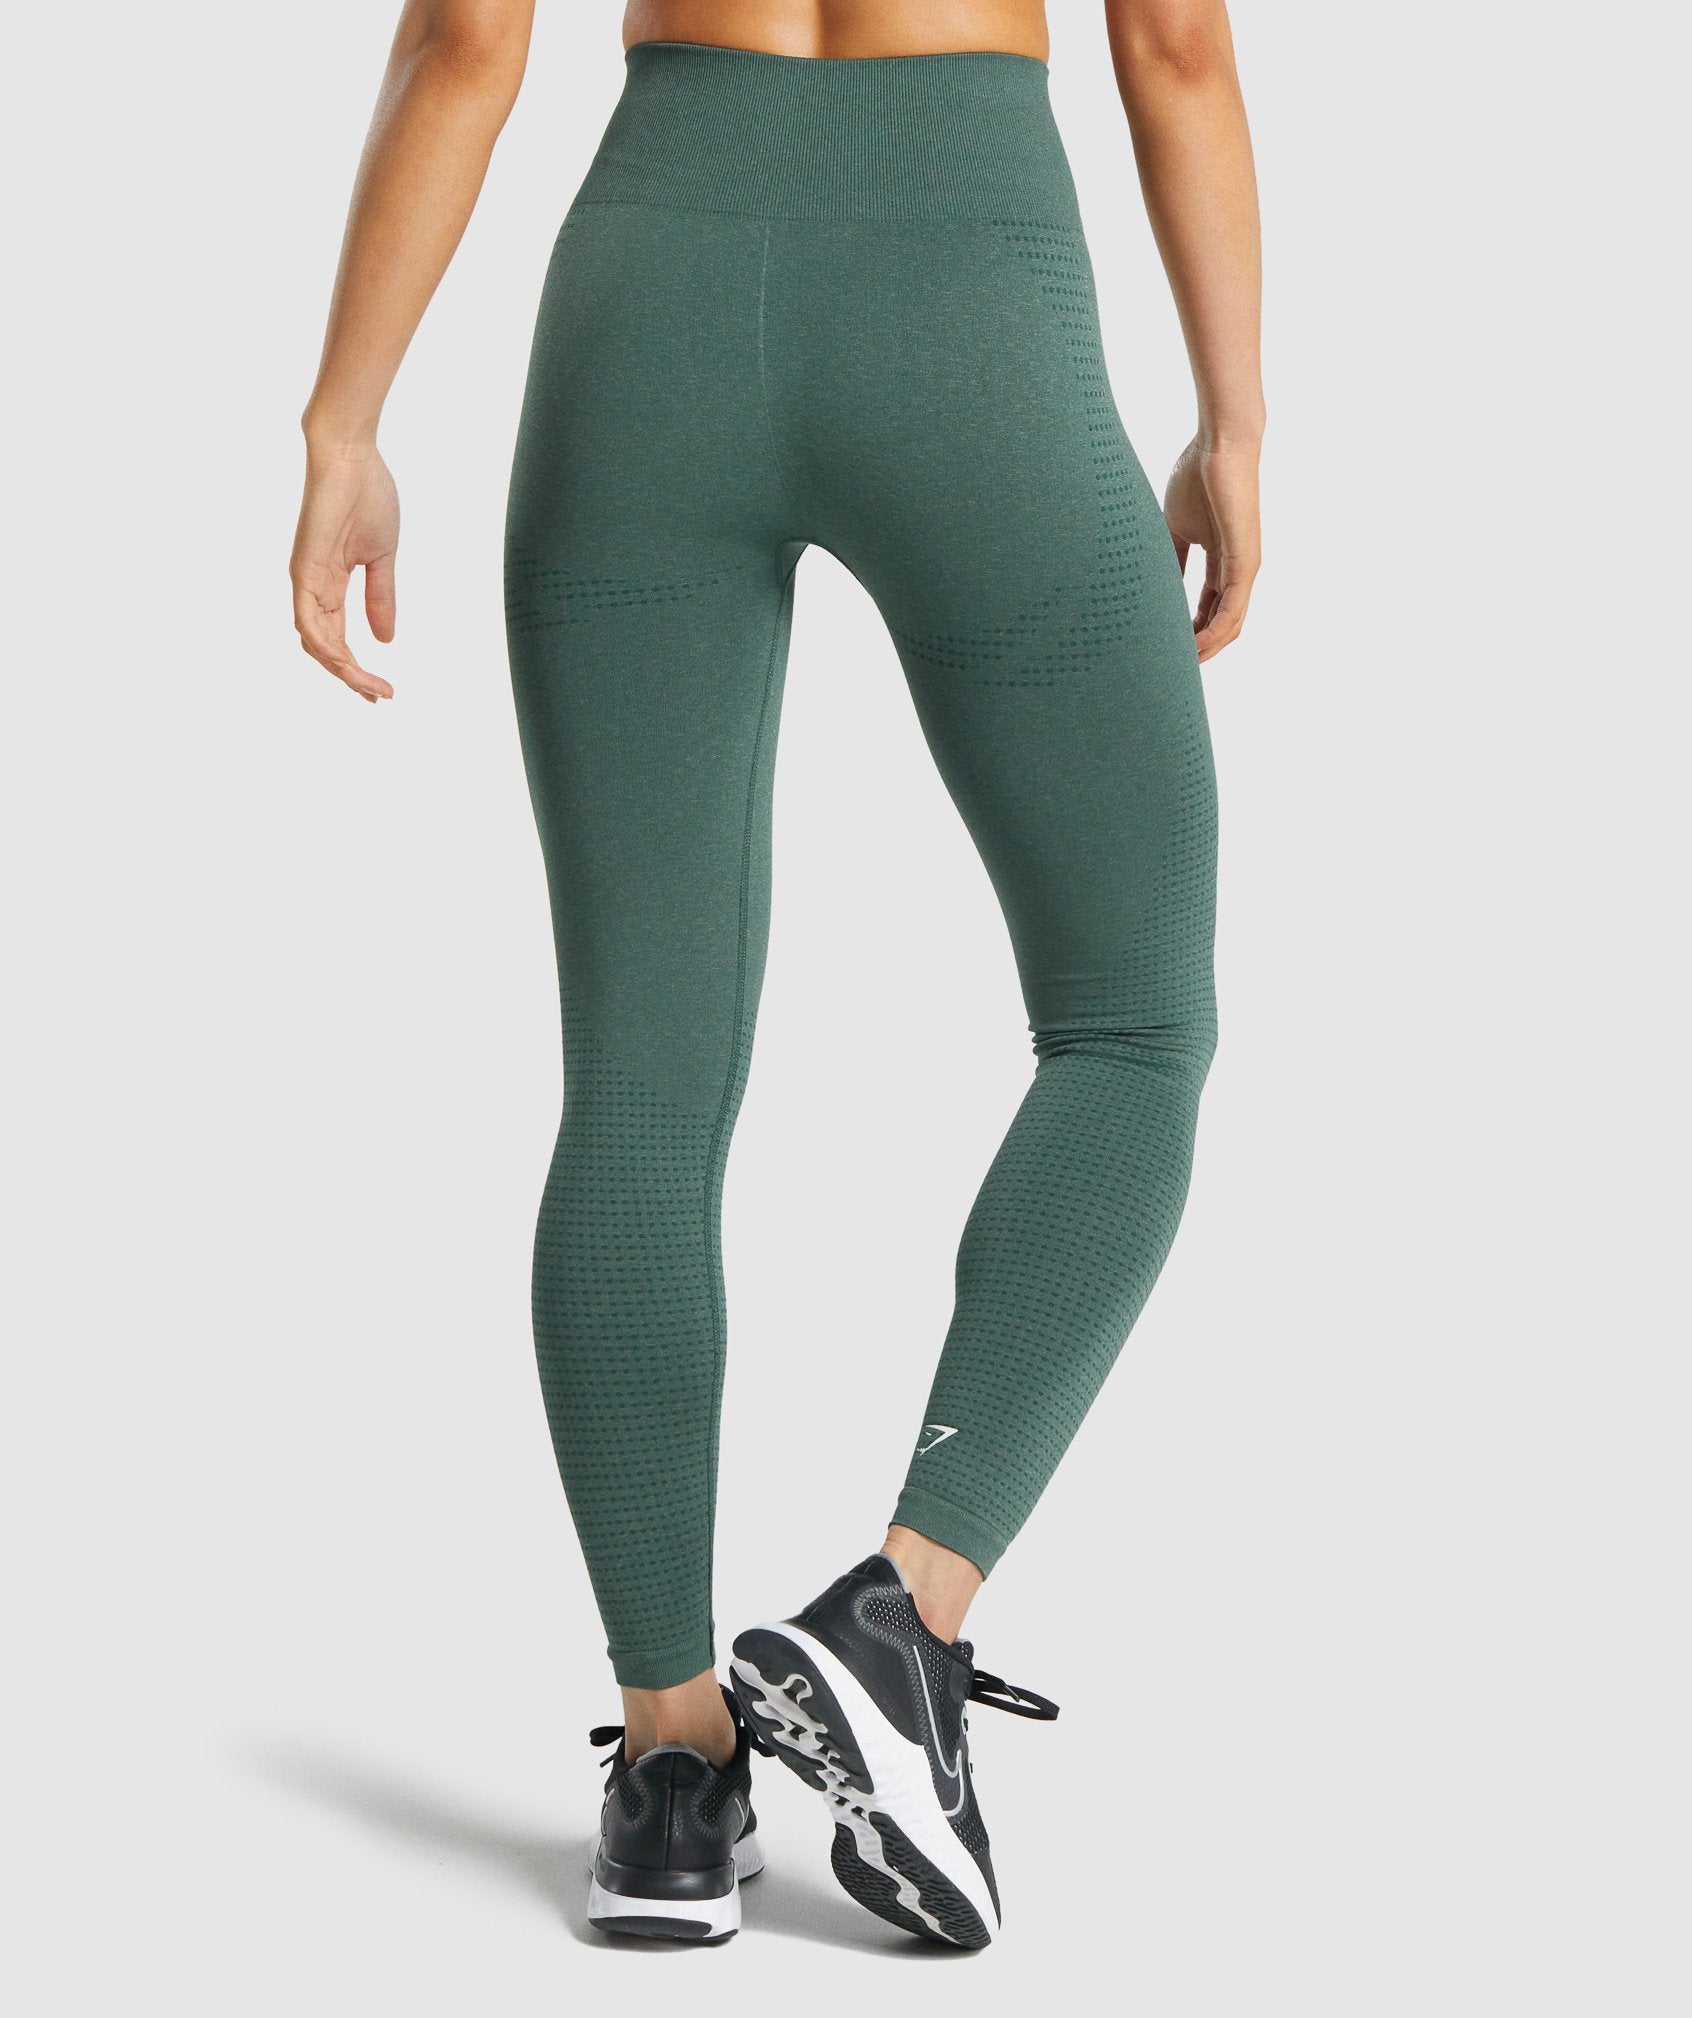 GYMSHARK WOMEN'S ENERGY+ Seamless Leggings Olive Green Size Extra Small EUR  35,01 - PicClick FR